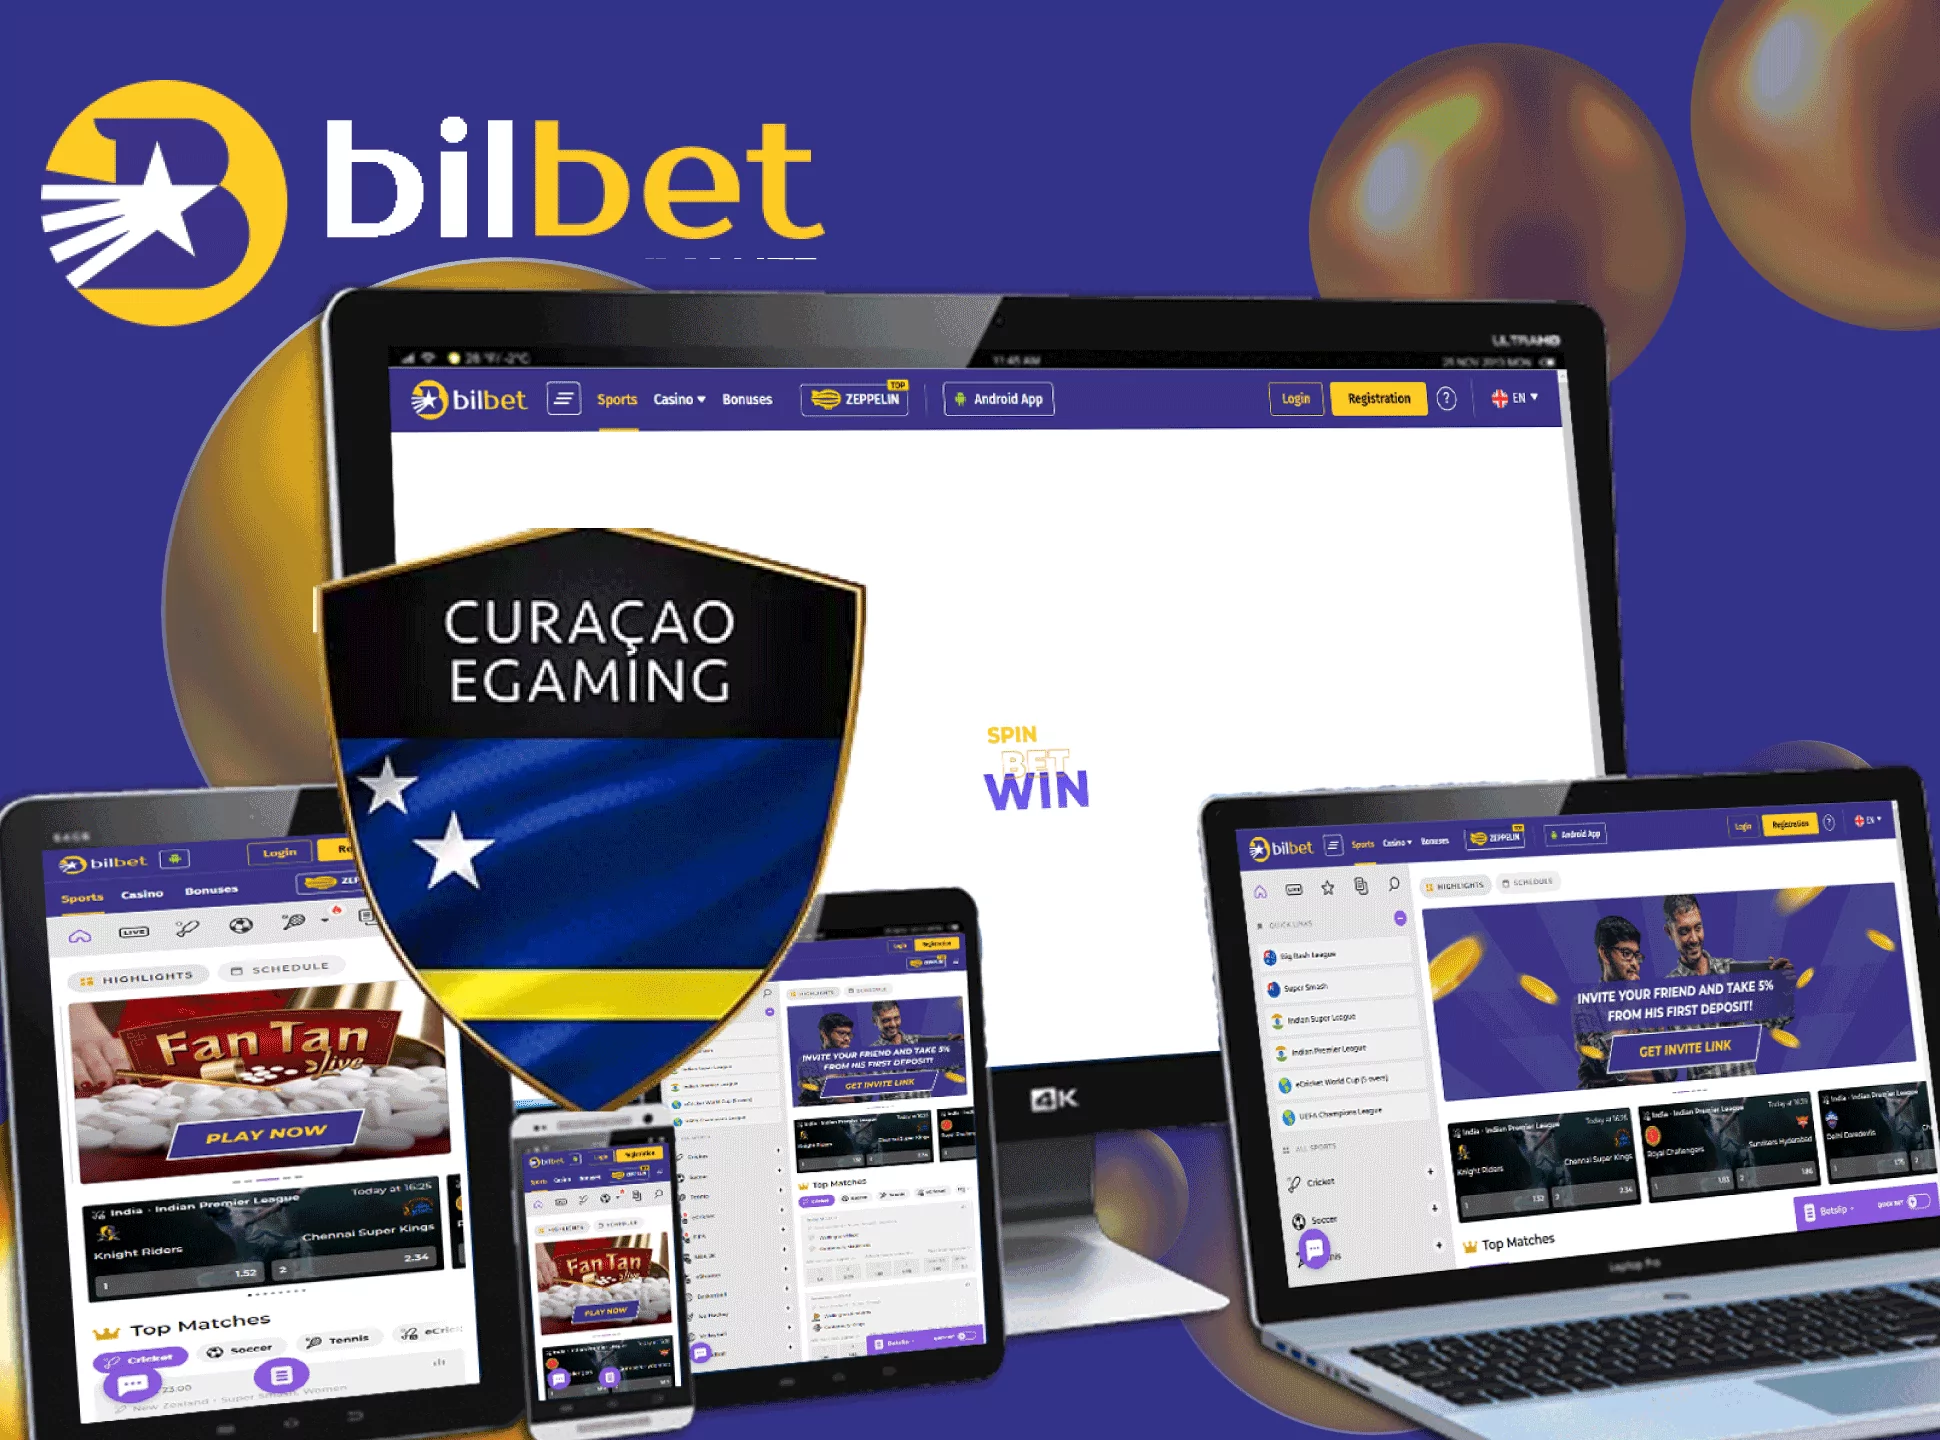 The Bilbet official site has all the gambling activities like sports betting. online casino, lotteries and other.